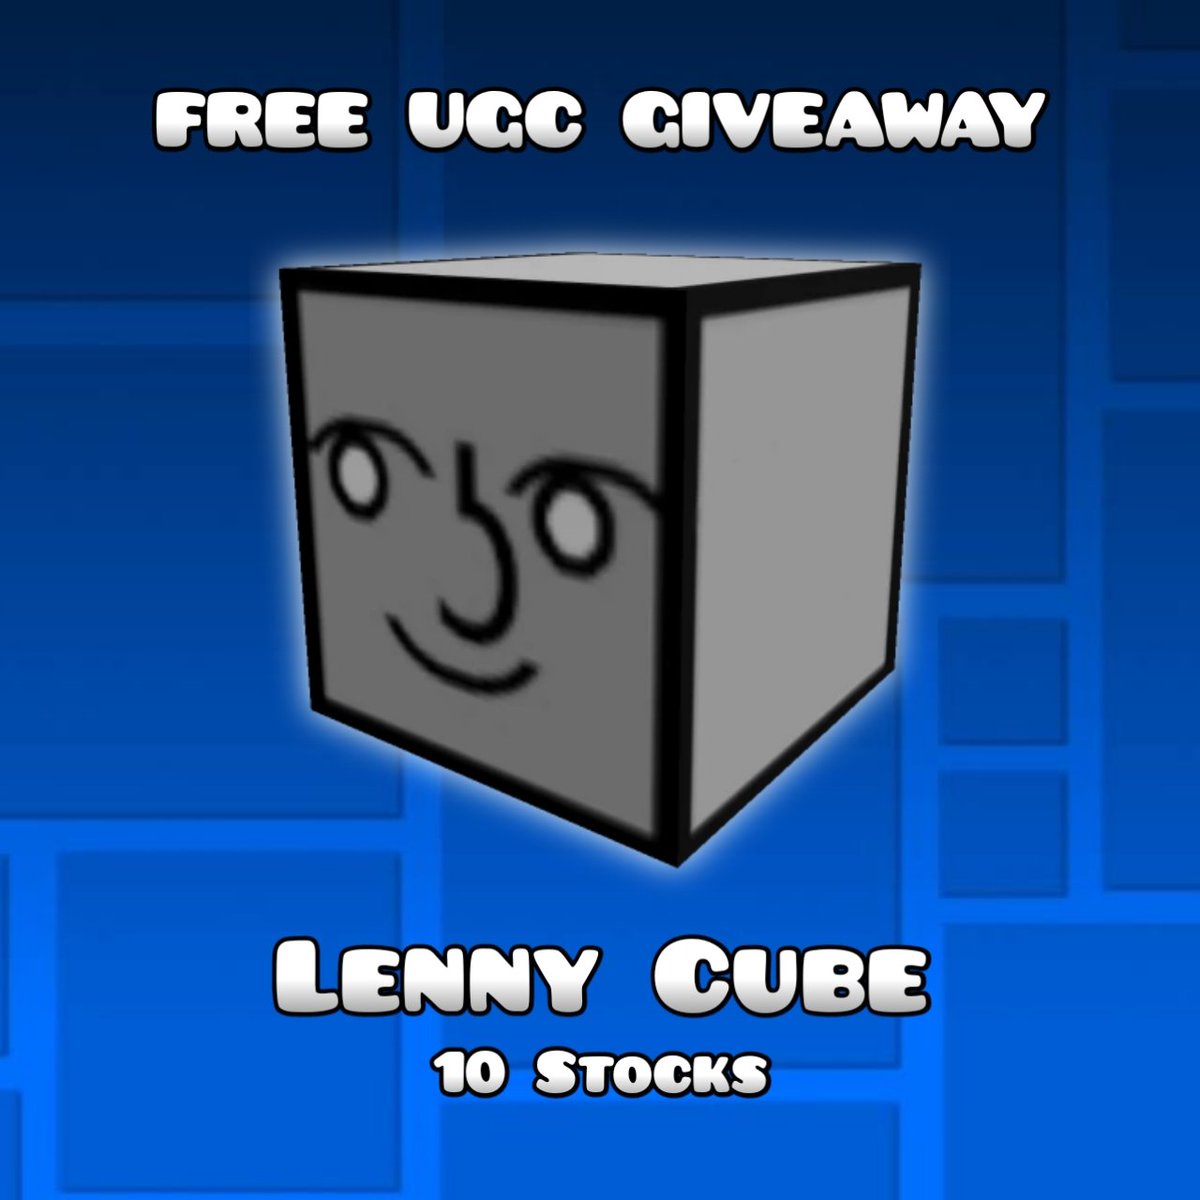 🎩 FREE UGC ITEM GIVEAWAY 🎩
Lenny Cube (my 1st free ugc)

HOW TO JOIN
👍 LIKE THIS POST 👍
🔄 RETWEET 🔄
🫂 FOLLOW ME & @RBXSantaDecides 🫂

🏆 10 WINNERS 🏆

⏰ ENDS IN TWO DAYS ⏰
🍀 GOOD LUCK EVERYONE! 🍀
#Roblox #RobloxUGC #RobloxDev #RobloxGiveaway #RTC